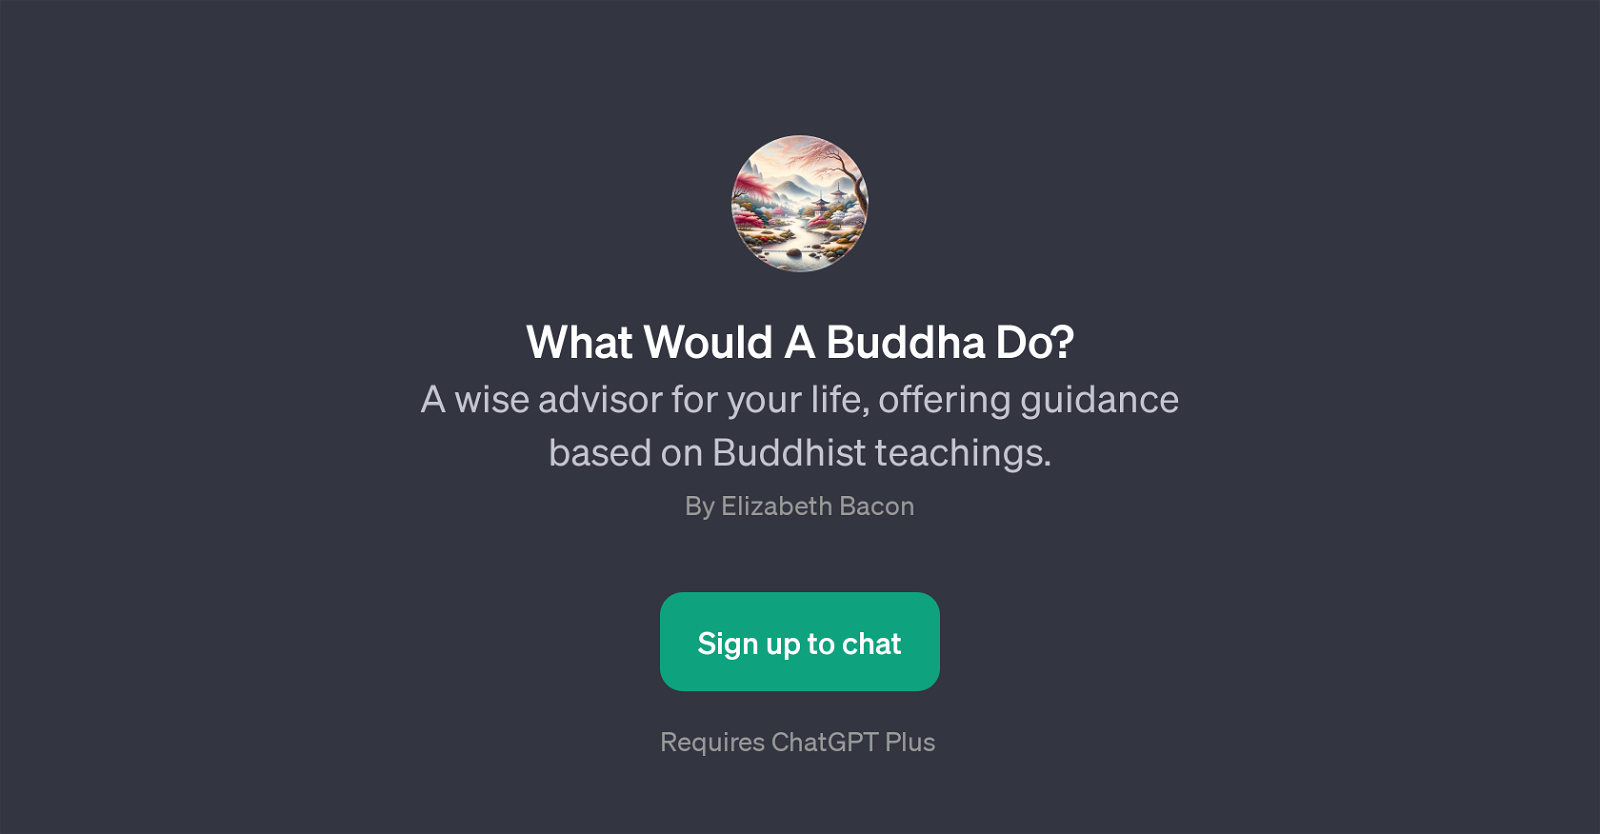 What Would A Buddha Do? website